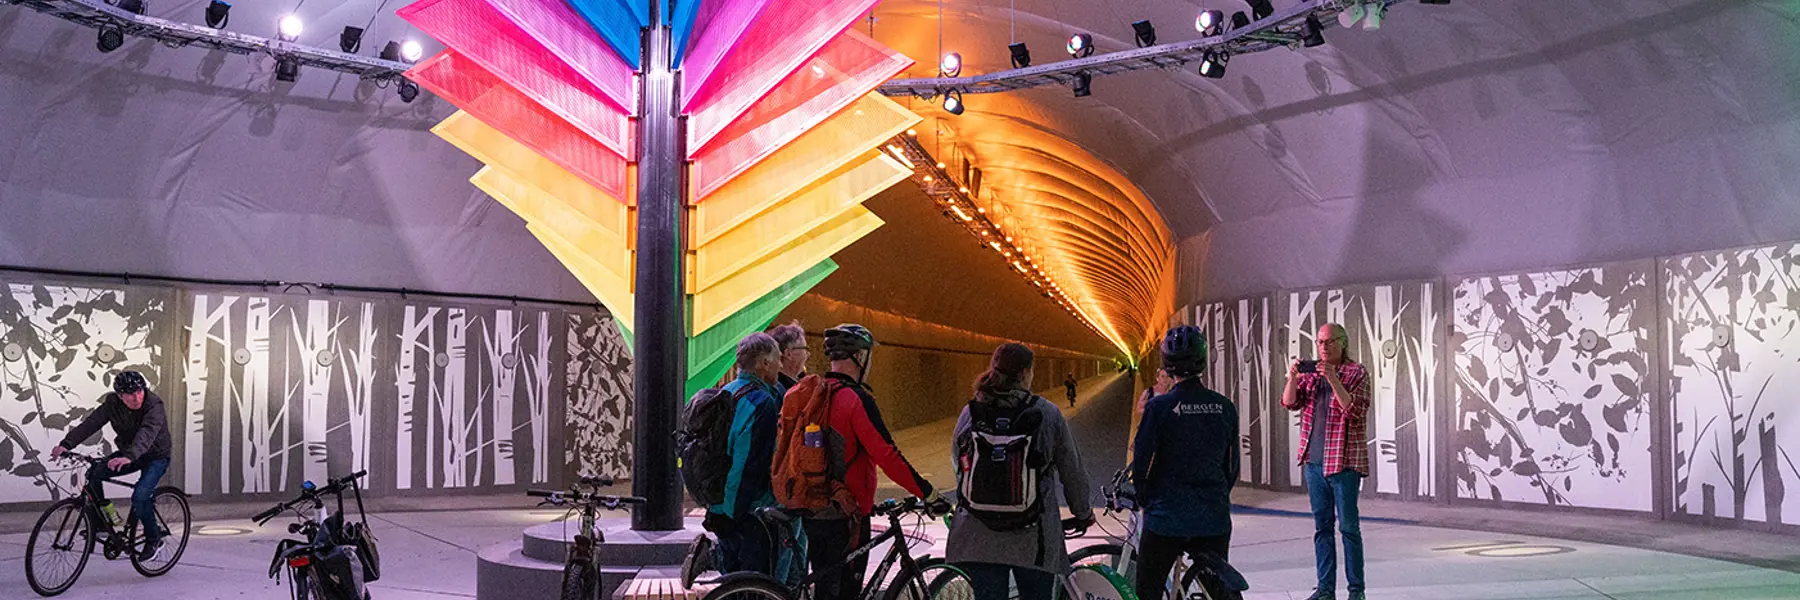 Sound insulation reduces the noise level from large fans in Bergen's new pedestrian and bicycle tunnel. Photo: Beerenberg.